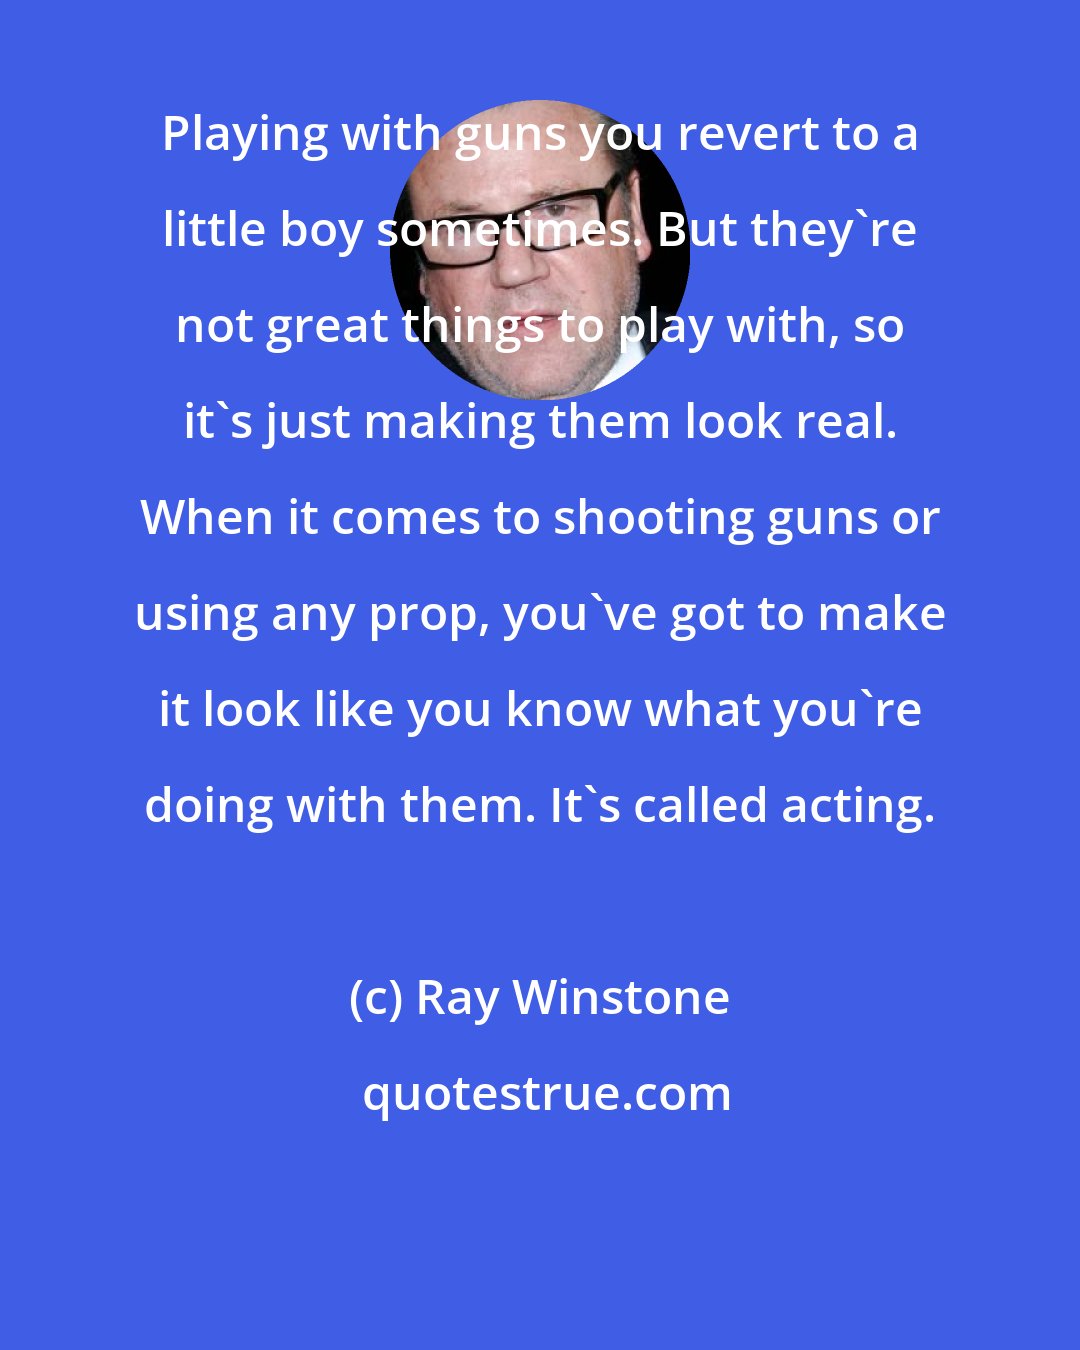 Ray Winstone: Playing with guns you revert to a little boy sometimes. But they're not great things to play with, so it's just making them look real. When it comes to shooting guns or using any prop, you've got to make it look like you know what you're doing with them. It's called acting.